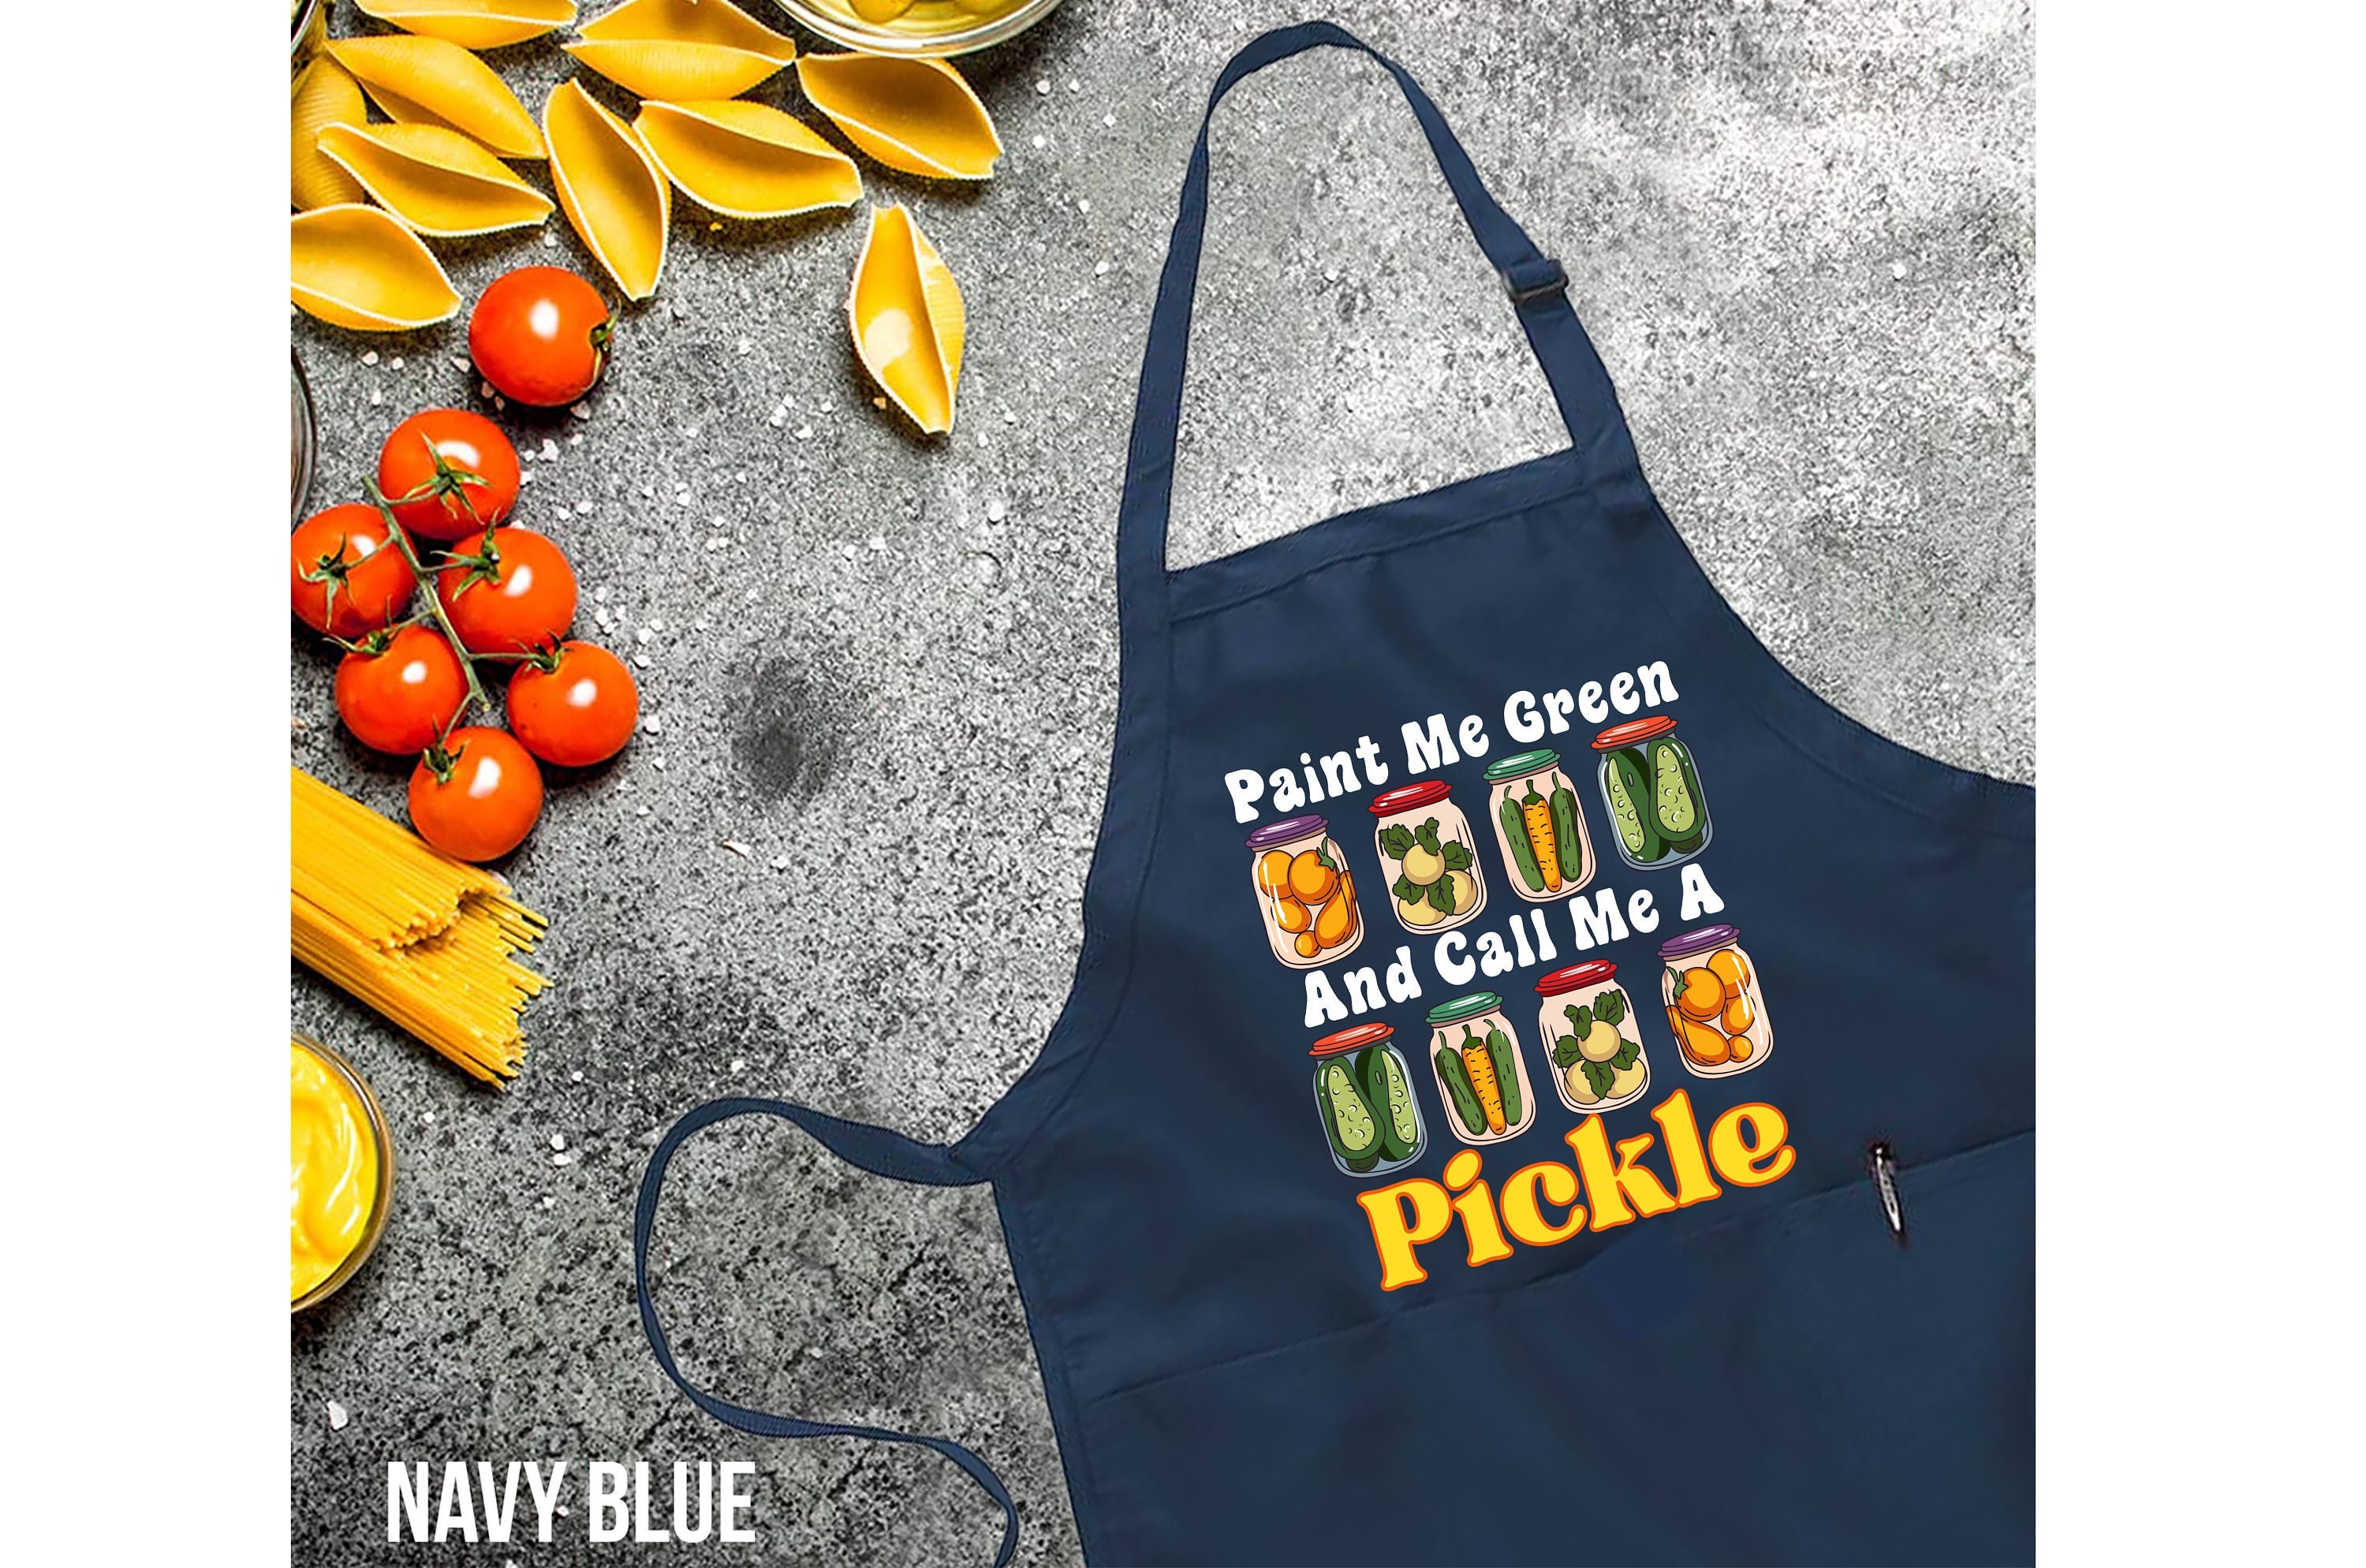 Dill Pickle Humor kitchen apron Just dill with it embroidered apron –  Threaded Stitch